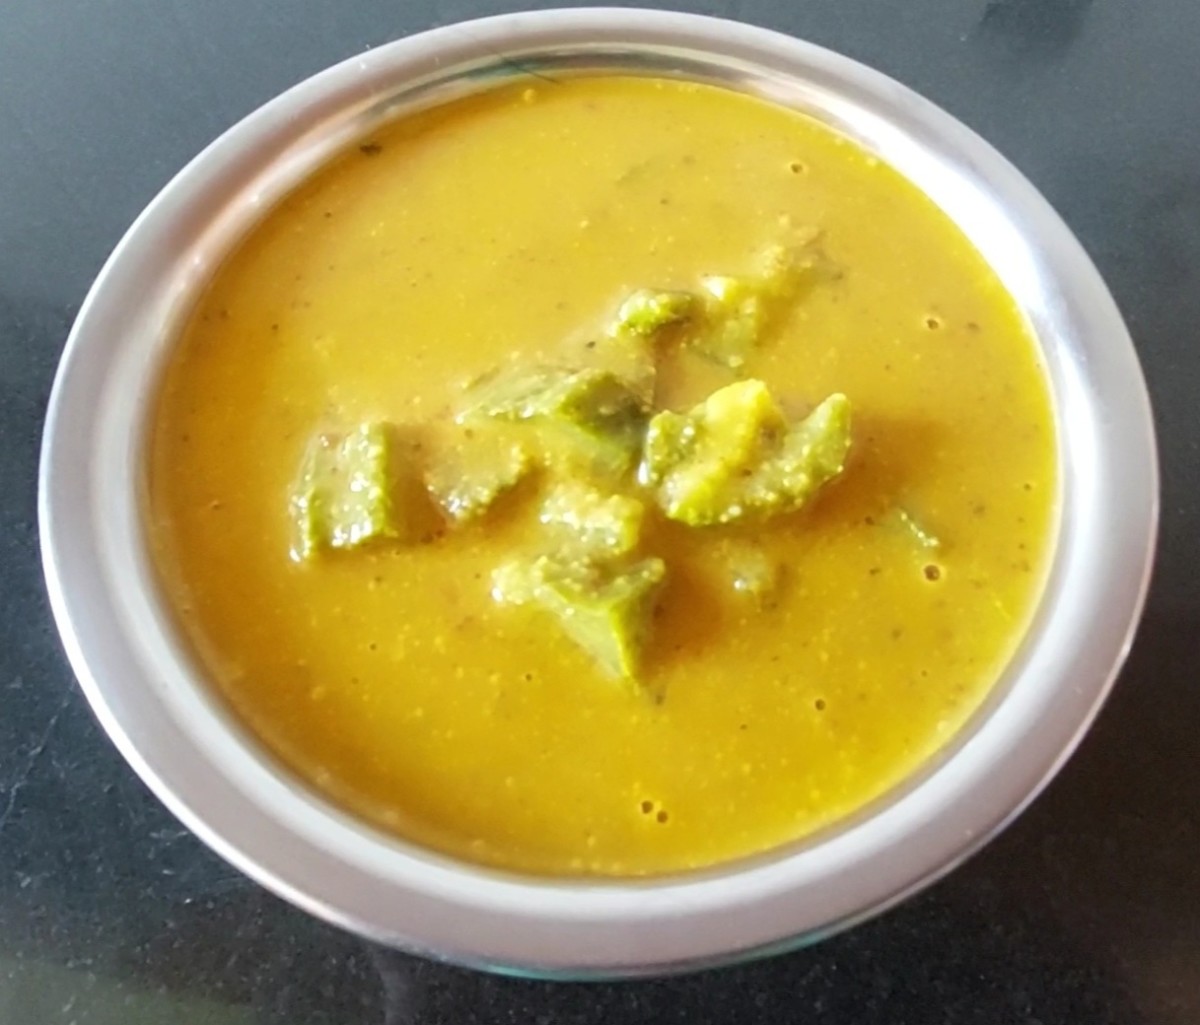 Tasty and healthy ridge gourd curry is ready to serve.